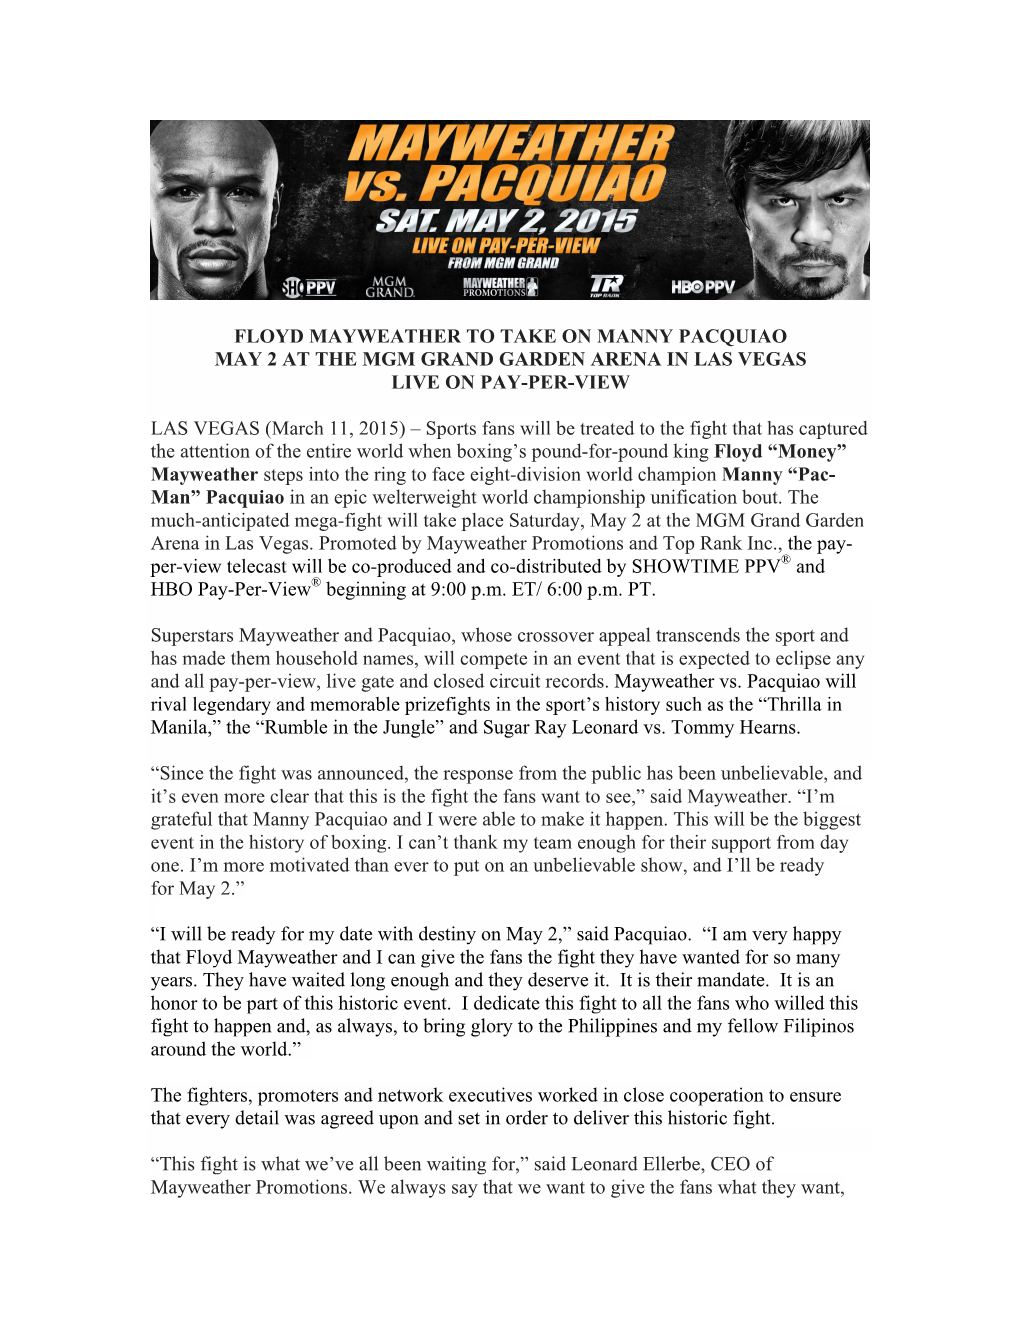 Floyd Mayweather to Take on Manny Pacquiao May 2 at the Mgm Grand Garden Arena in Las Vegas Live on Pay-Per-View